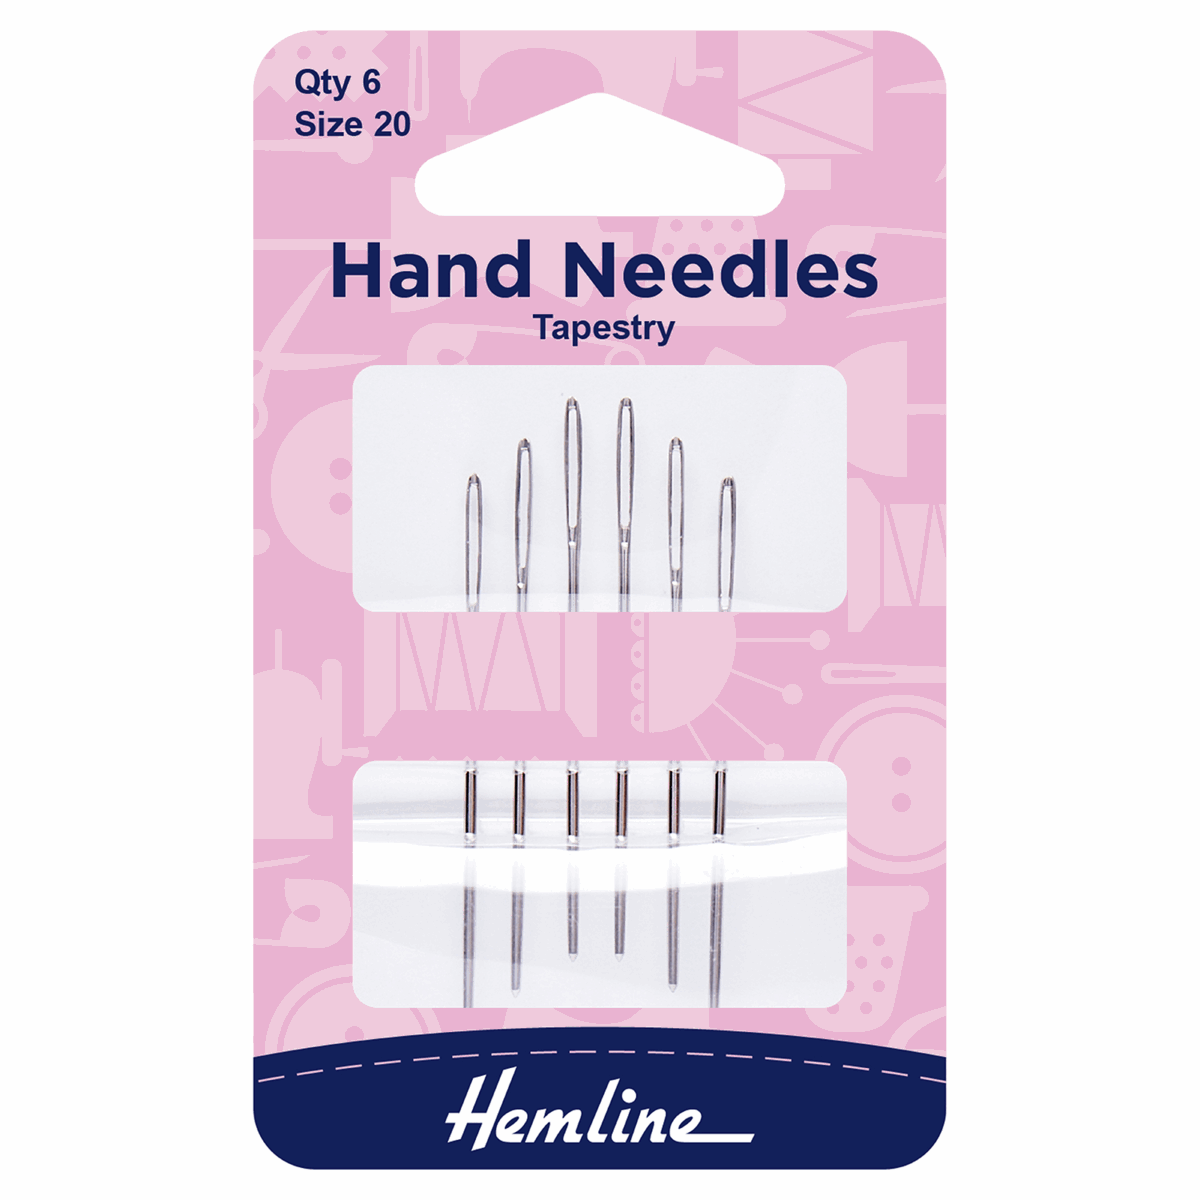 Size 20 Cross stitch /Tapestry : Hand Sewing Needles  : 6 Pieces : by Hemline 